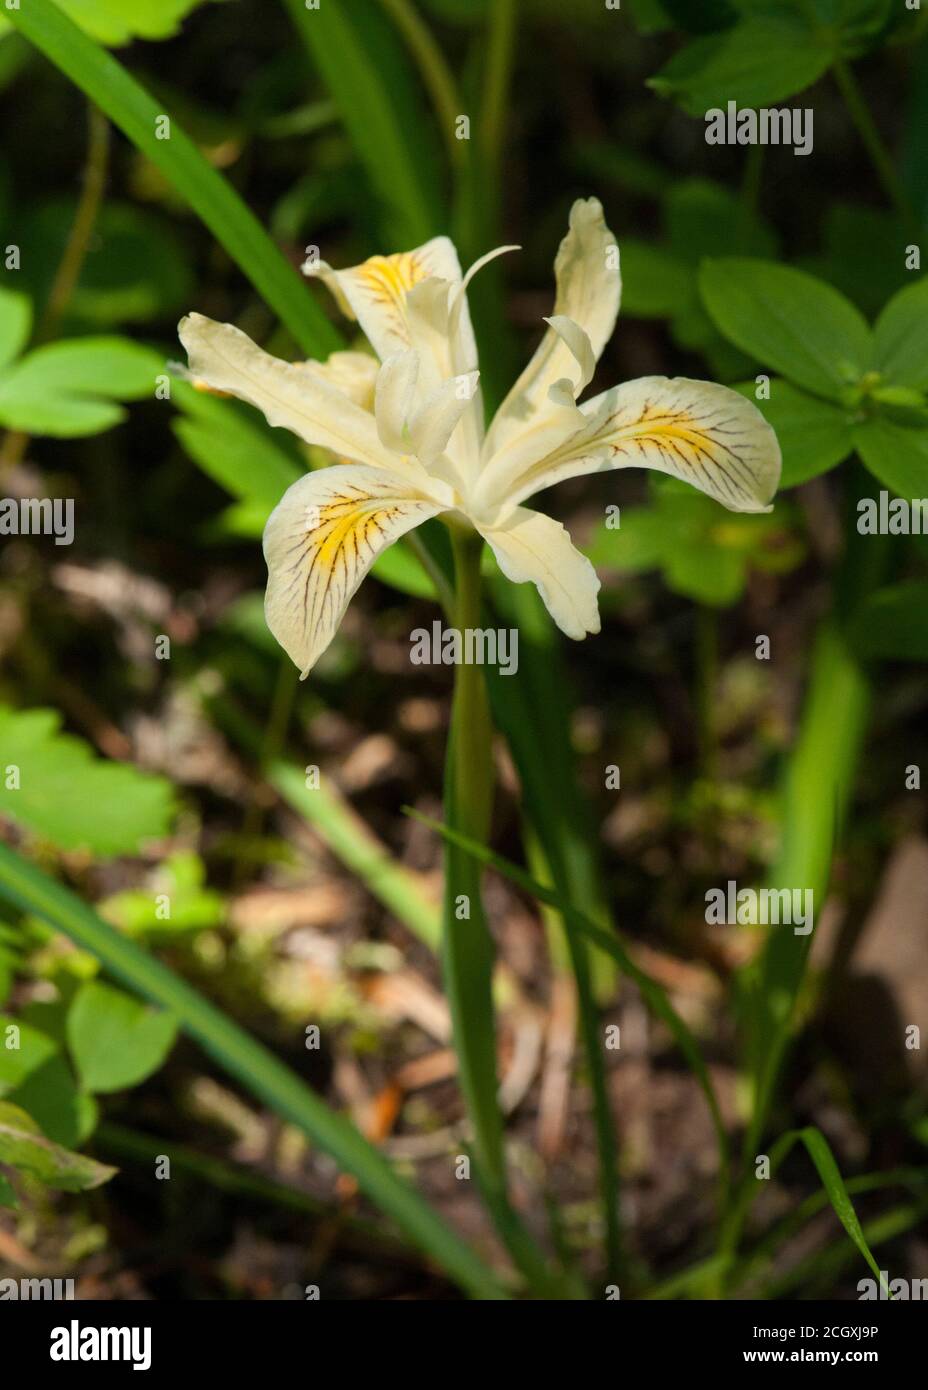 The Yellowleaf Iris (Iris chrysophylla) is an uncommon, but not endangered plant. Stock Photo